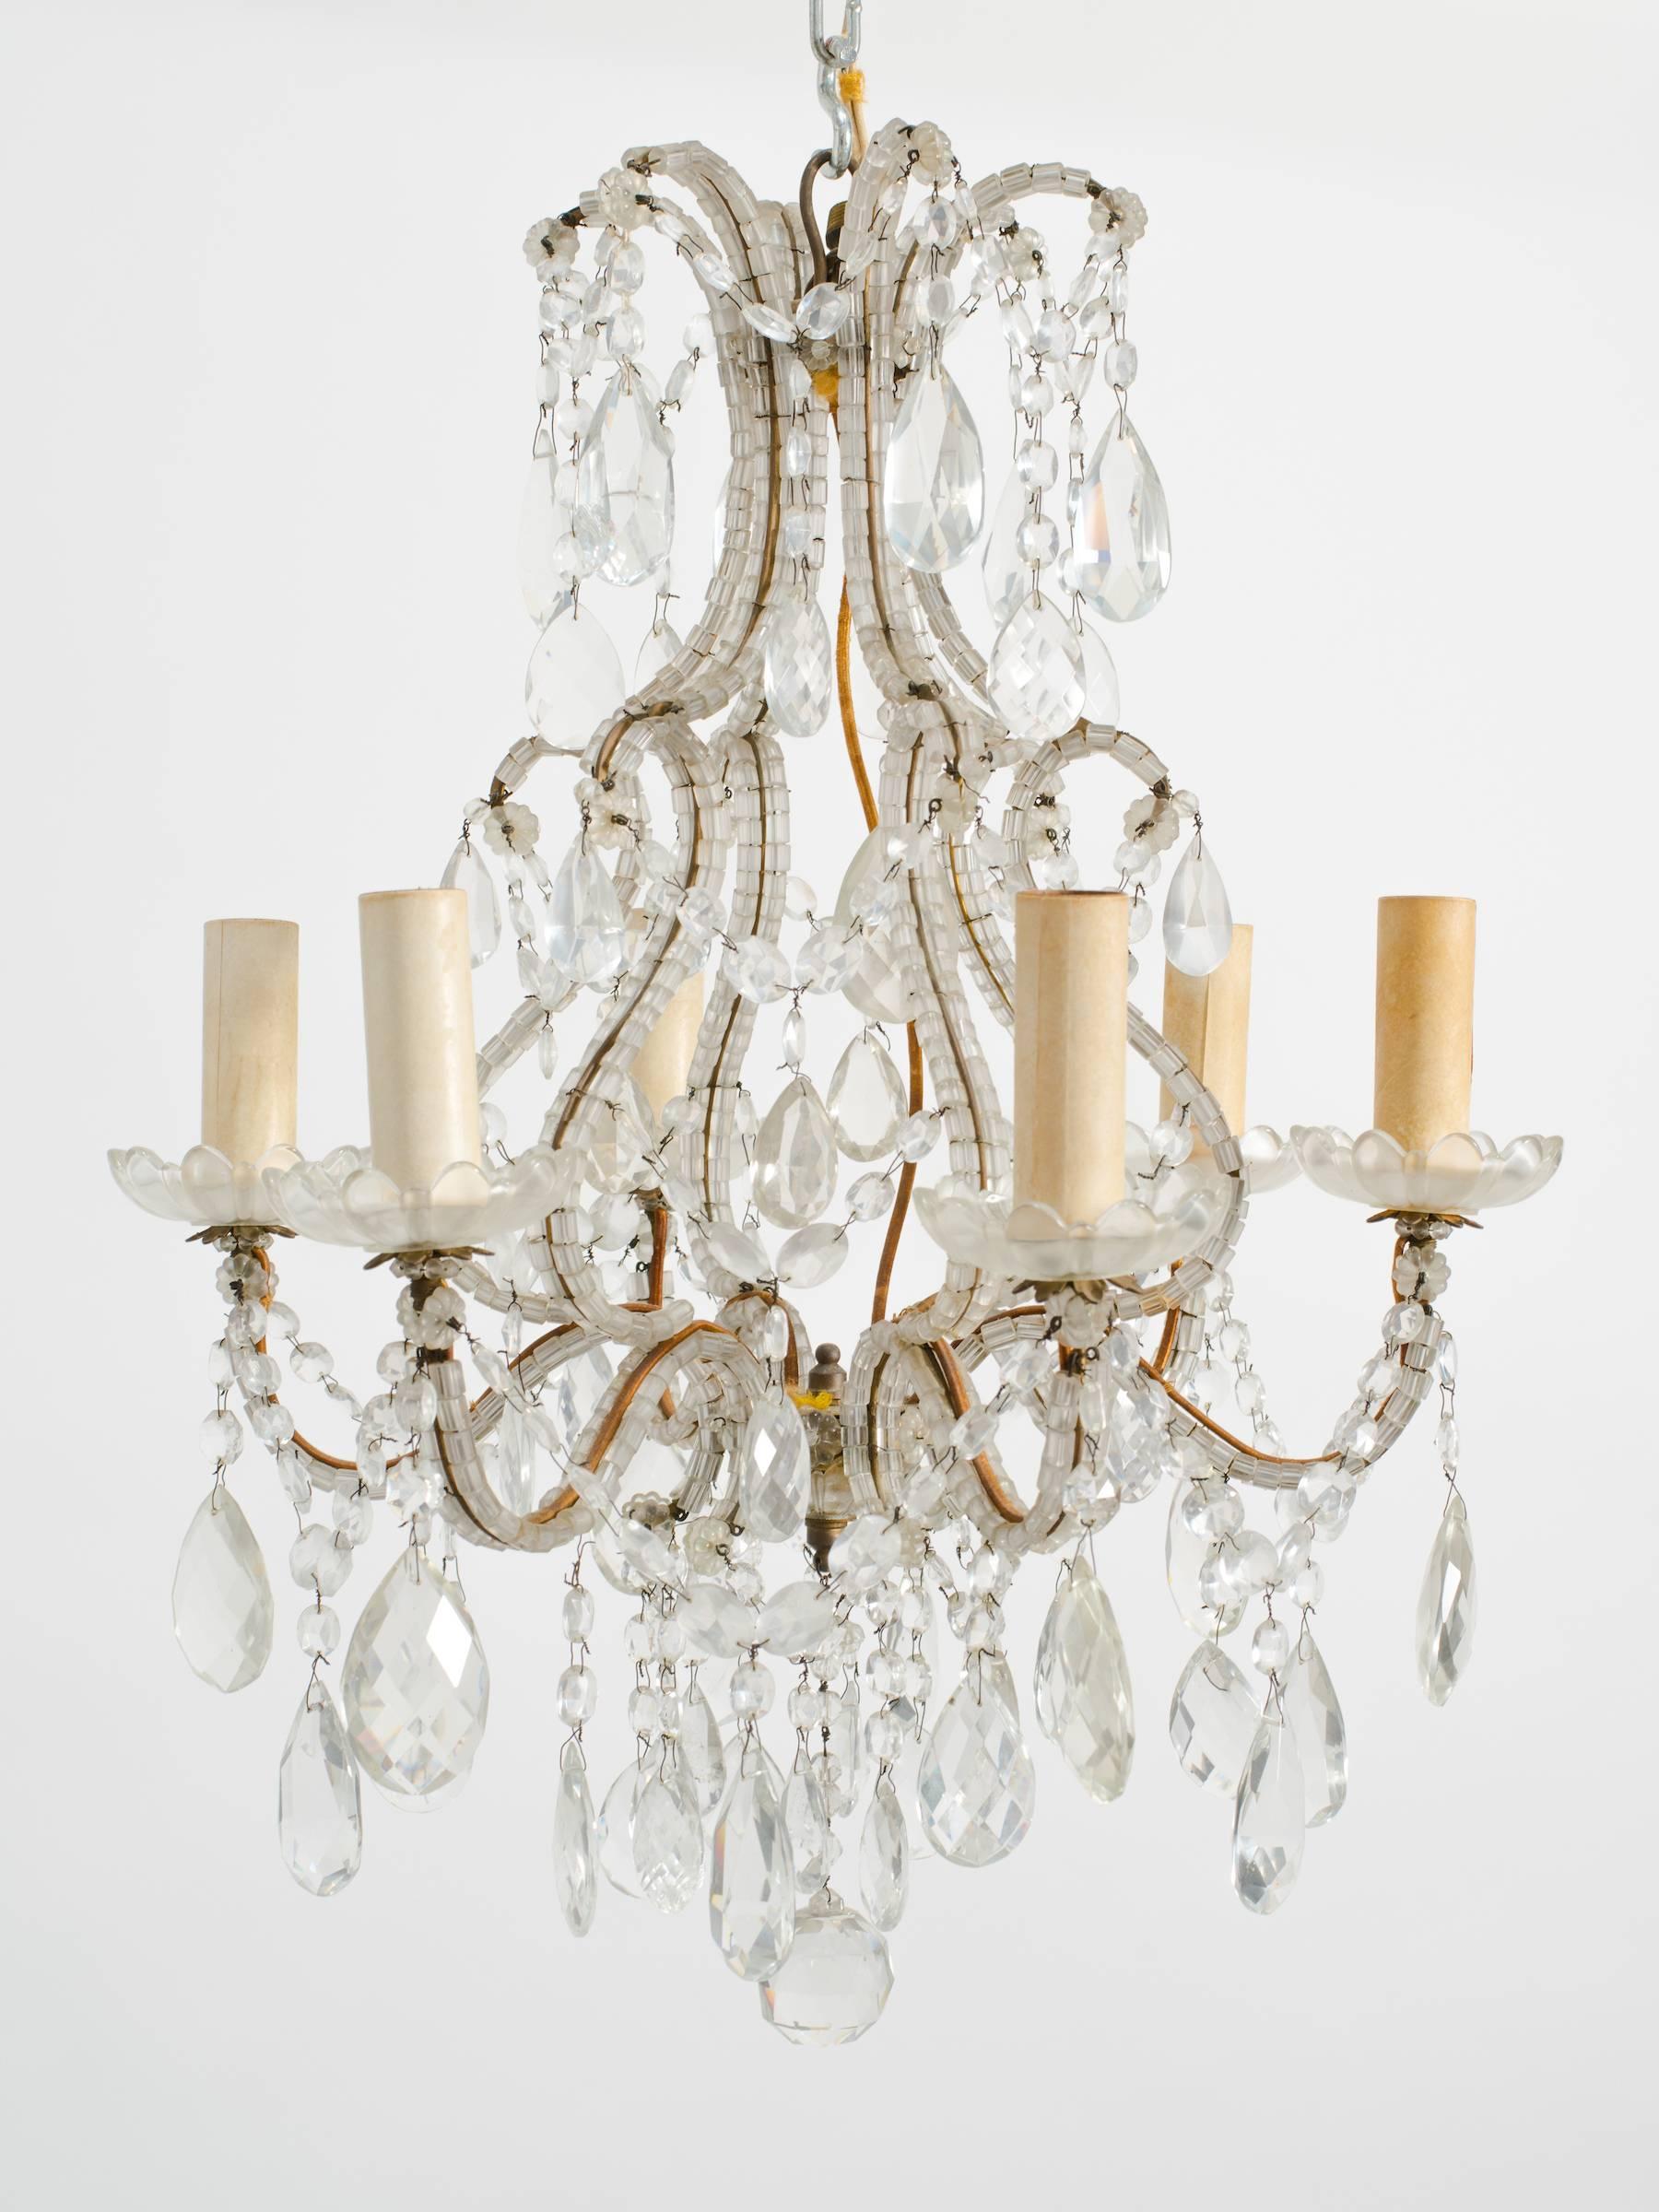 Elegant French beaded chandelier from a Scarsdale NY mansion.